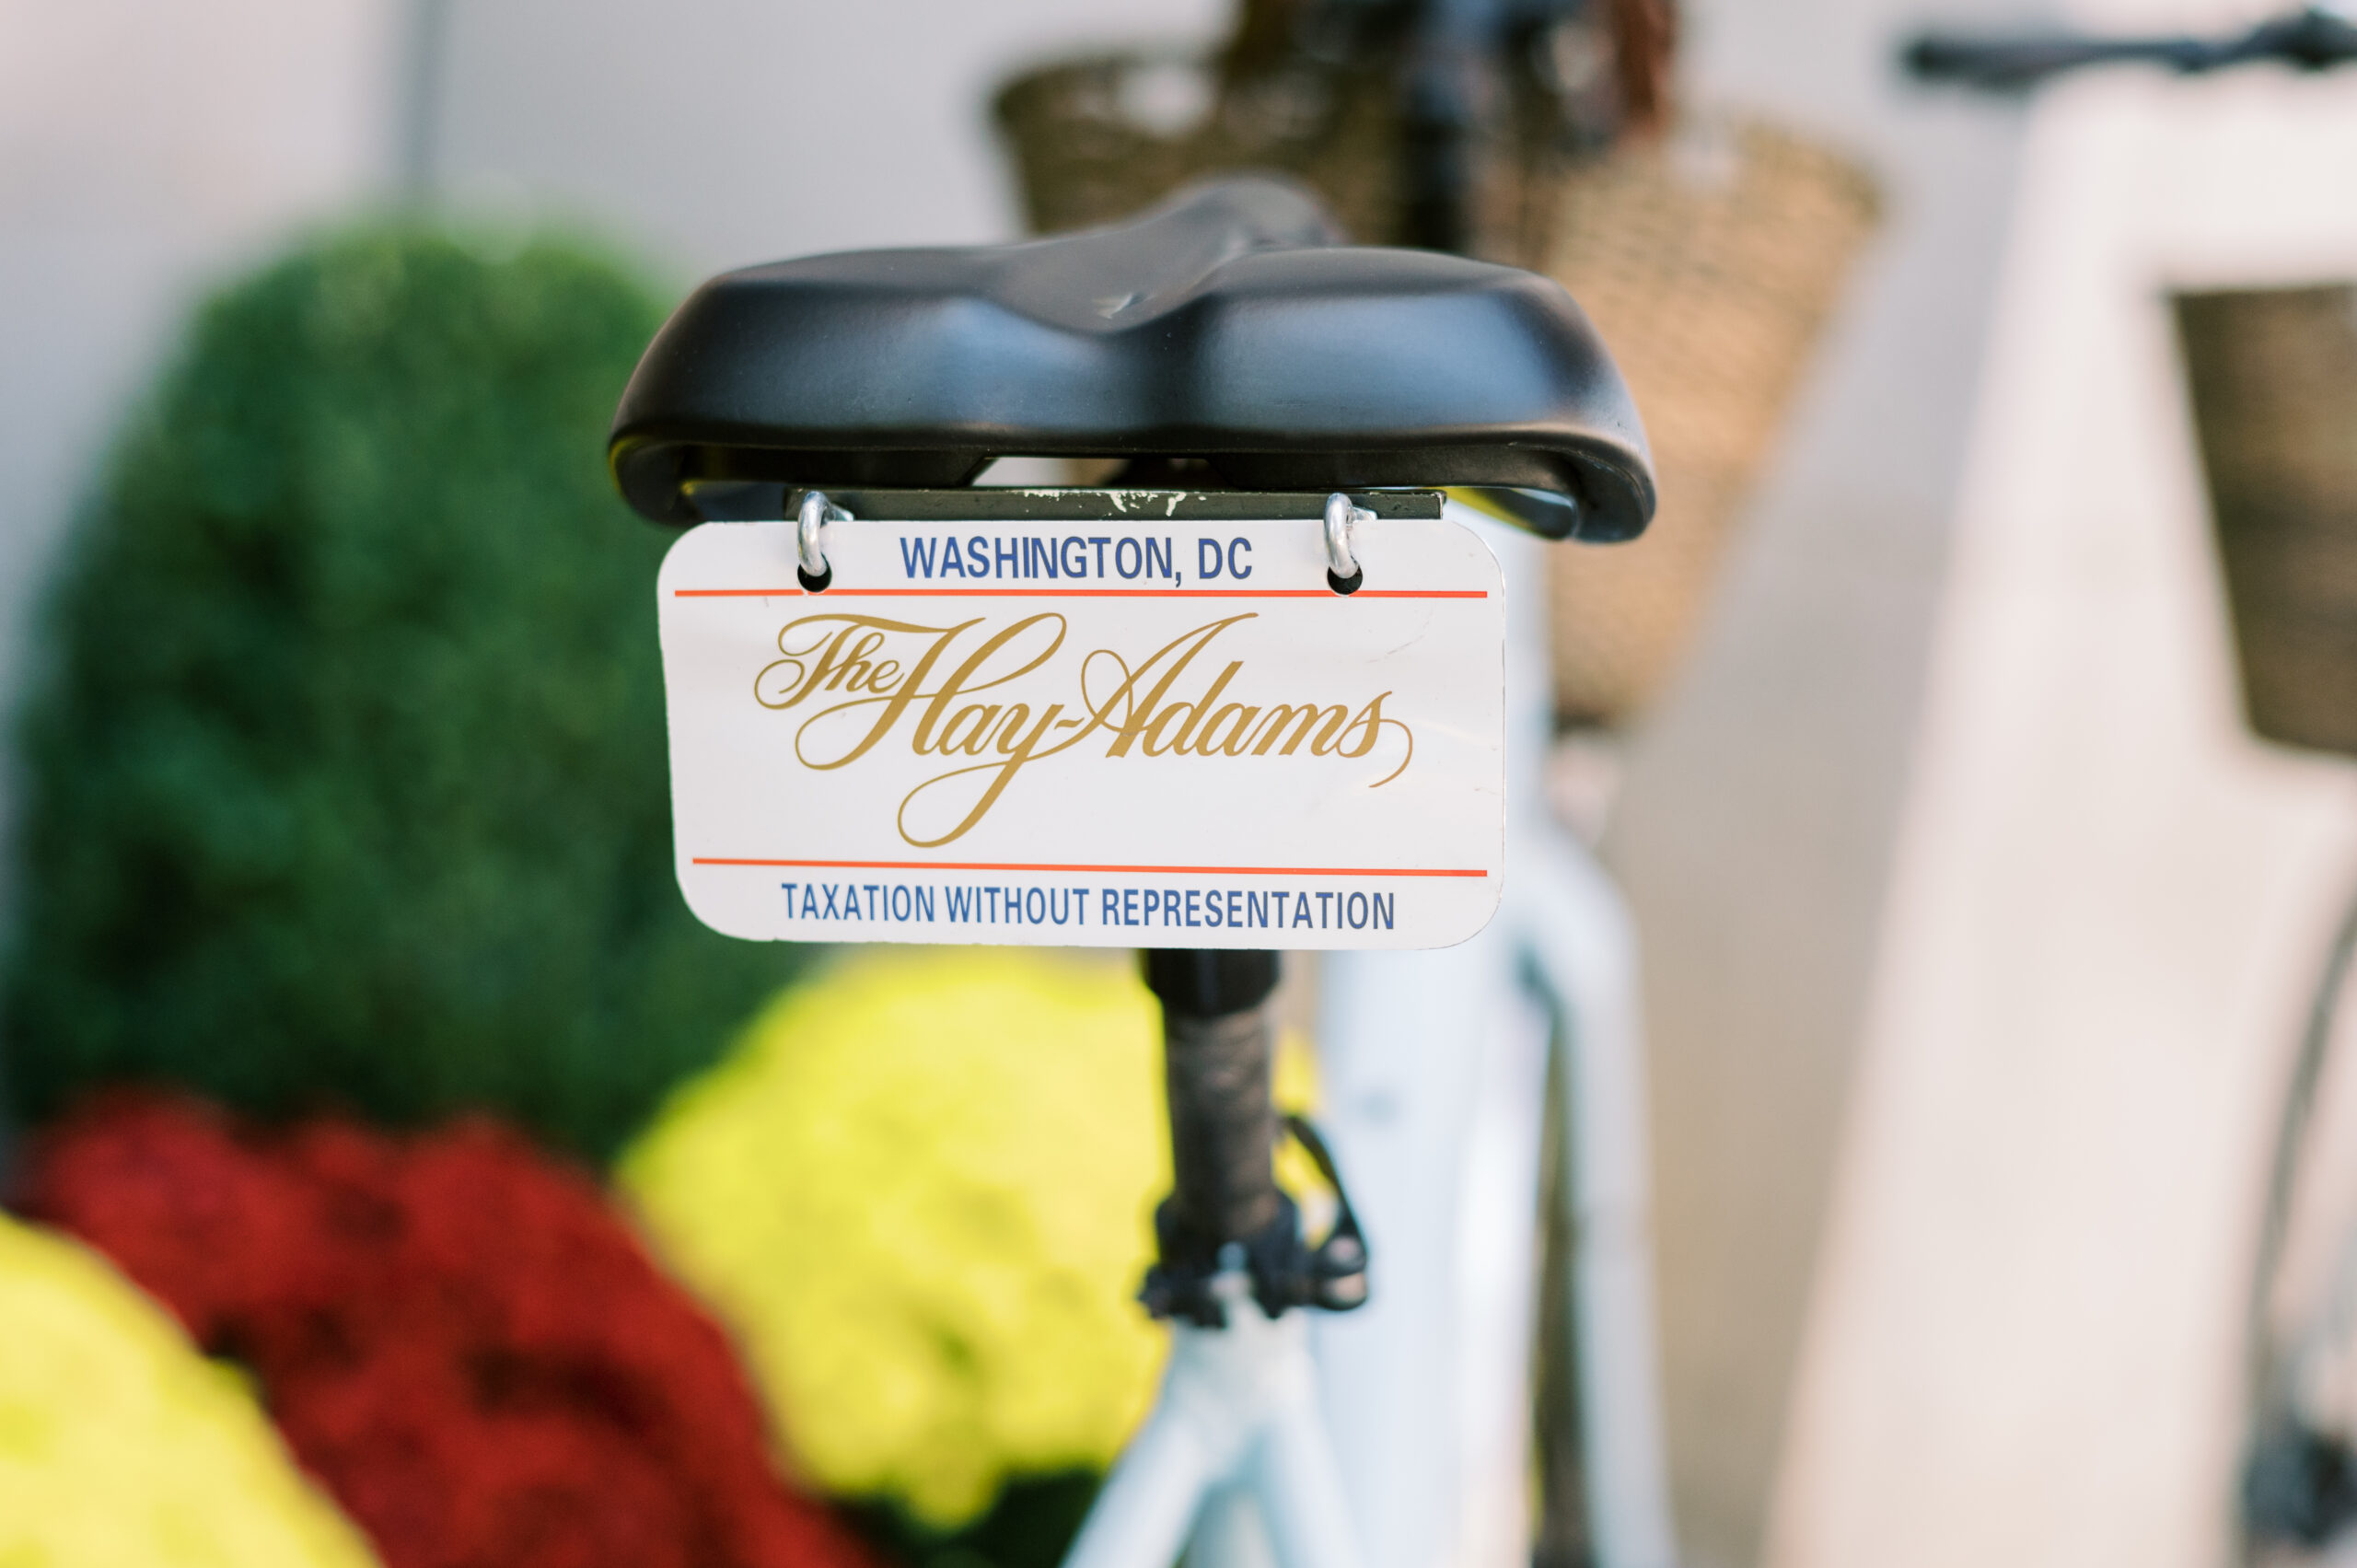 A blue rental bicycle sits outside of the Hay Adams Wedding venue and sports a license plate that says "Hay-Adams"